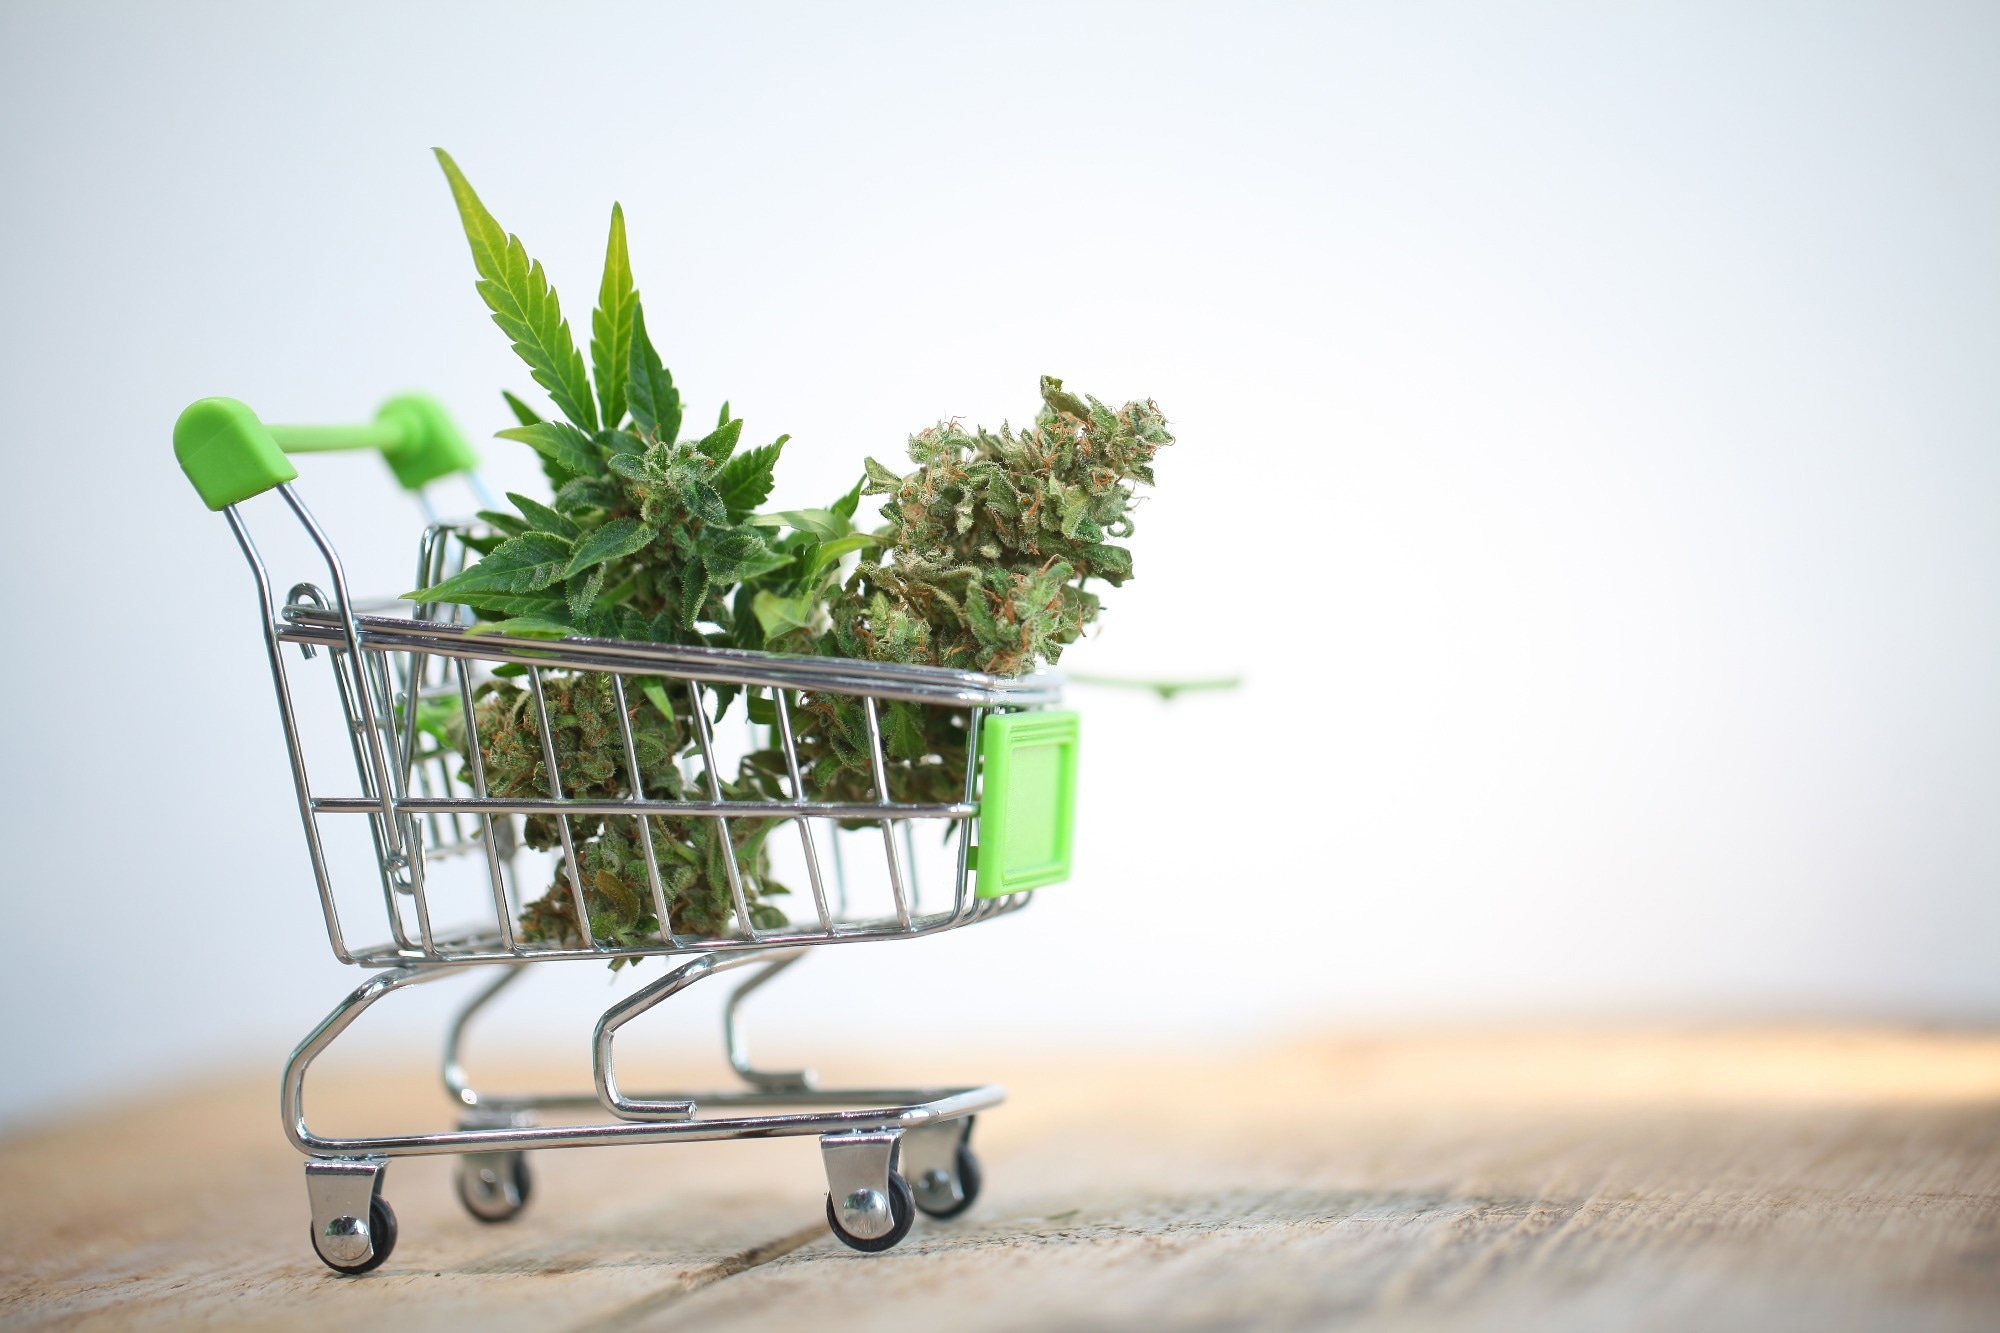 Study: The impact of legal cannabis availability on cannabis use and health outcomes: A systematic review. Image Credit: OMfotovideocontent/Shutterstock.com